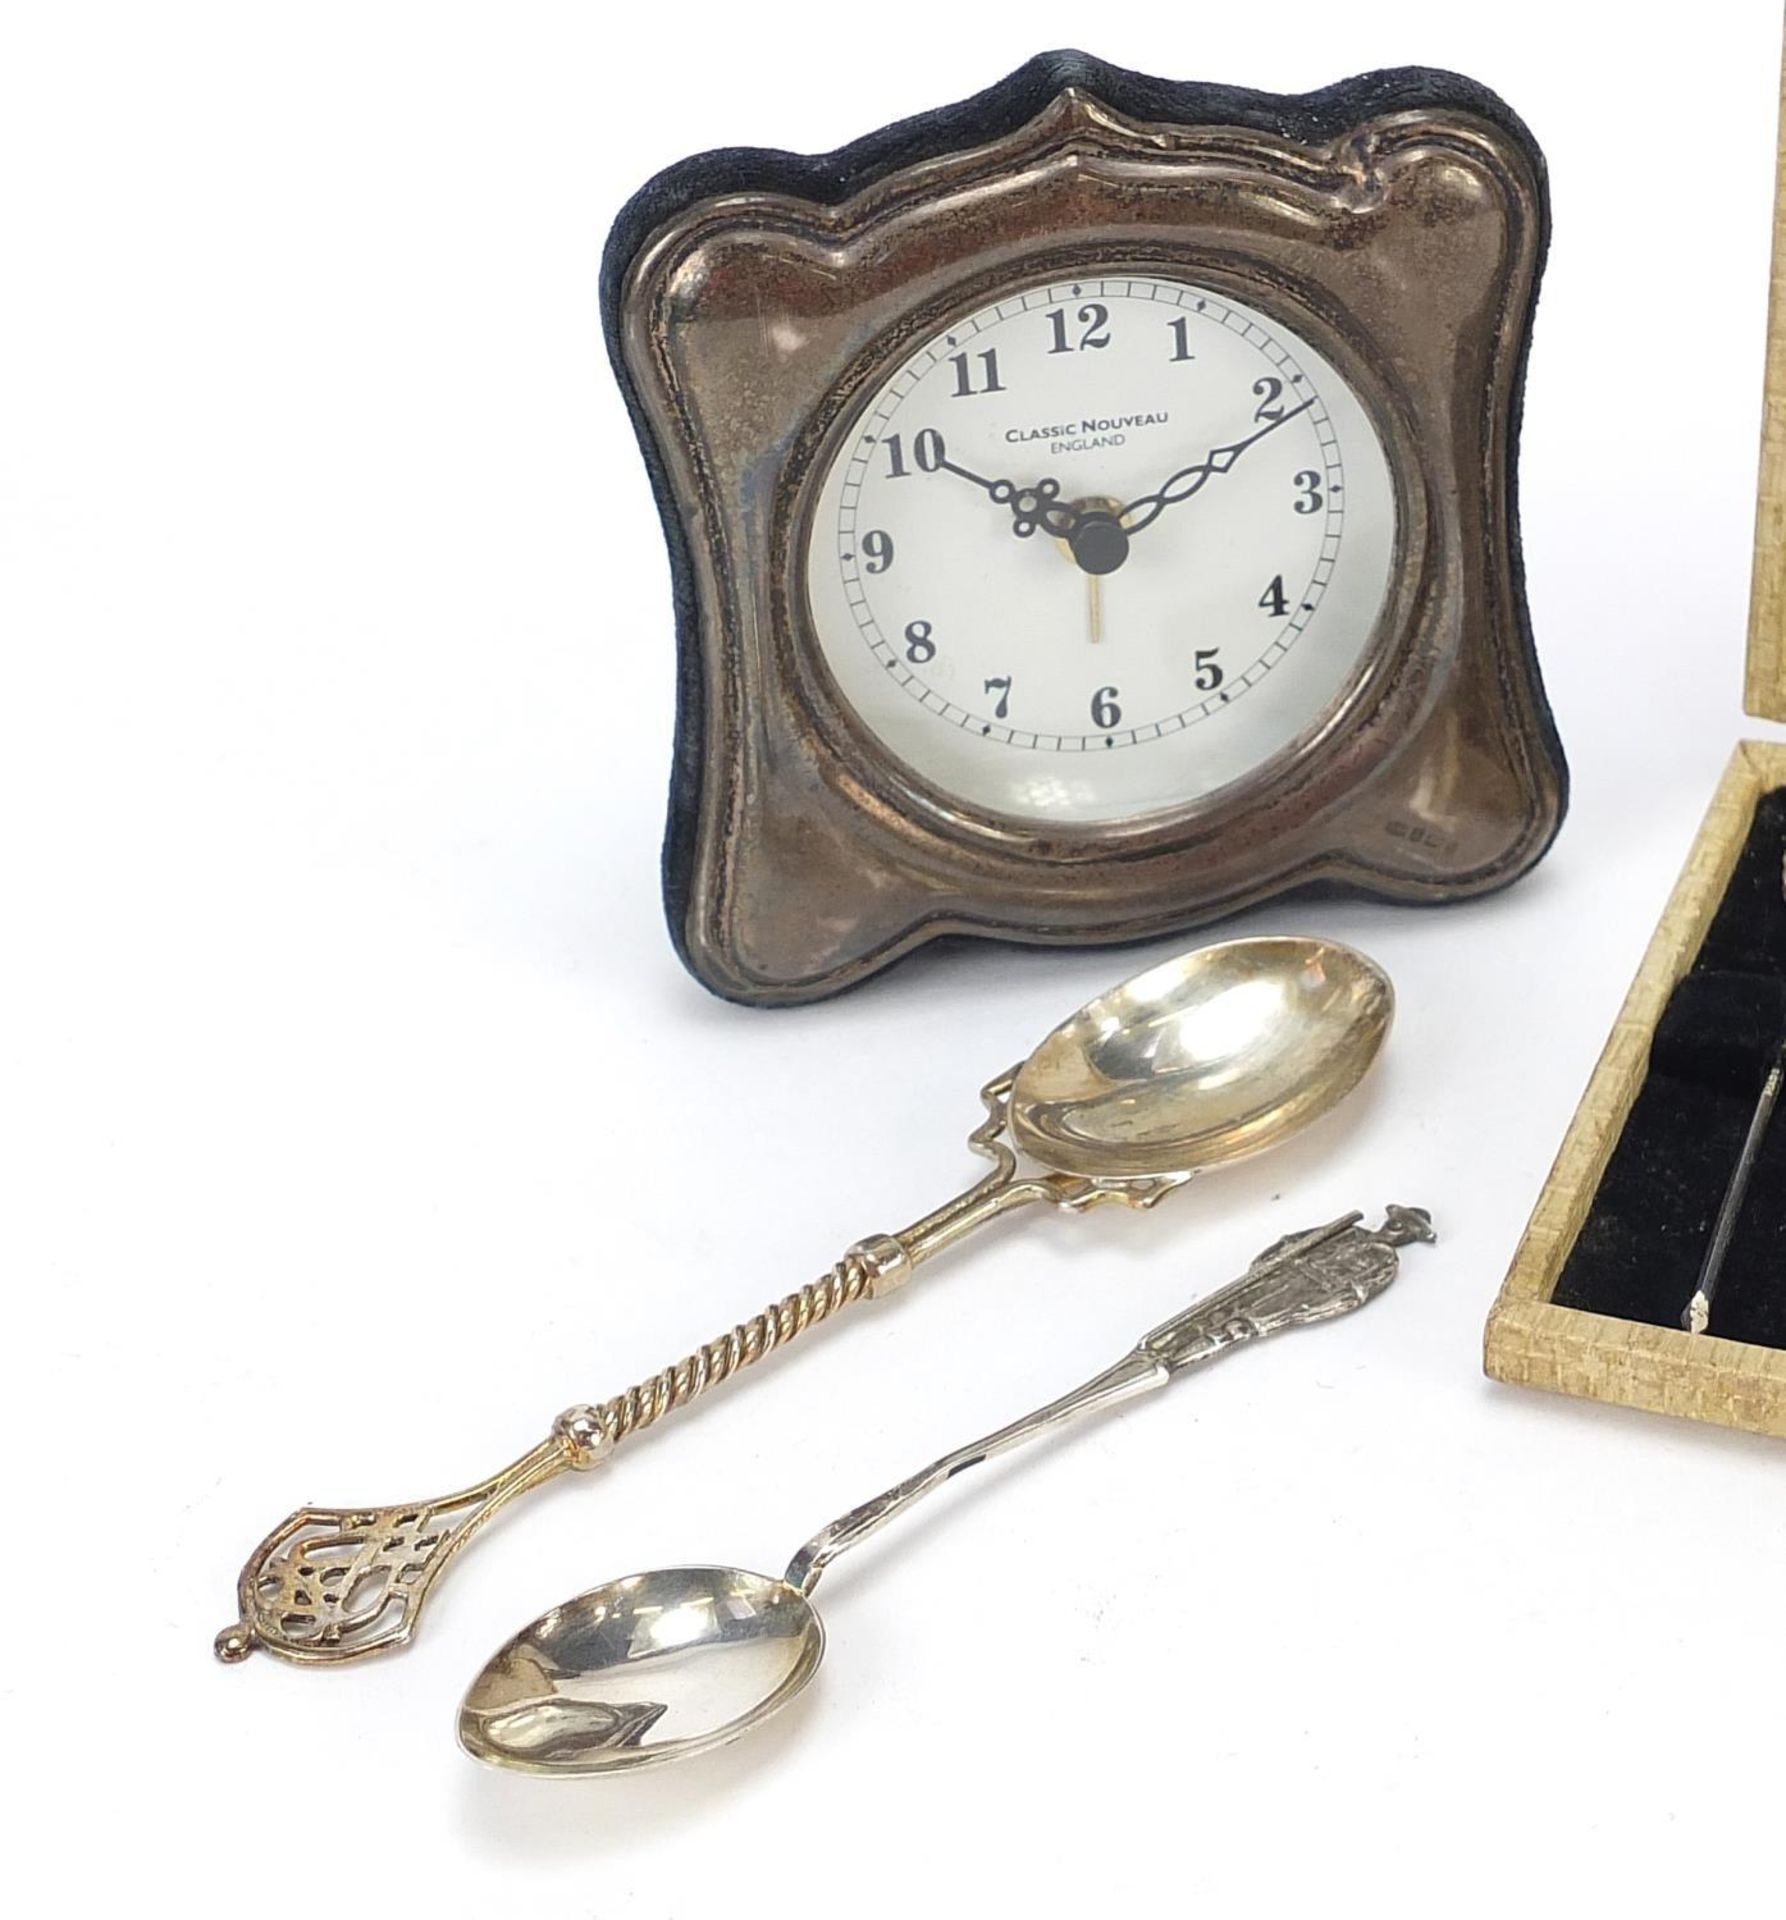 Silver and silver plated objects including an Art Nouveau style silver desk clock and set of - Image 2 of 4